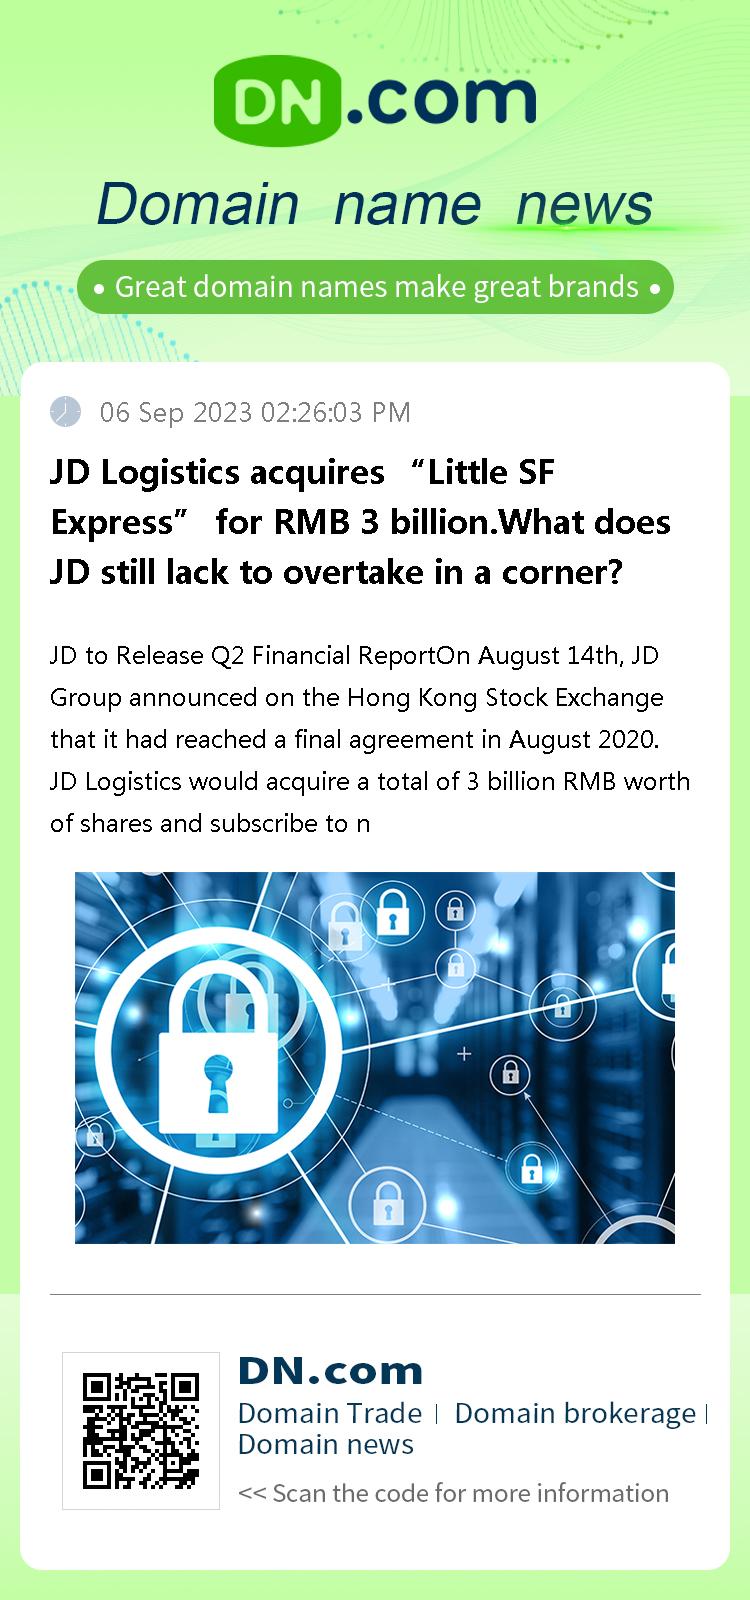 JD Logistics acquires “Little SF Express” for RMB 3 billion.What does JD still lack to overtake in a corner?